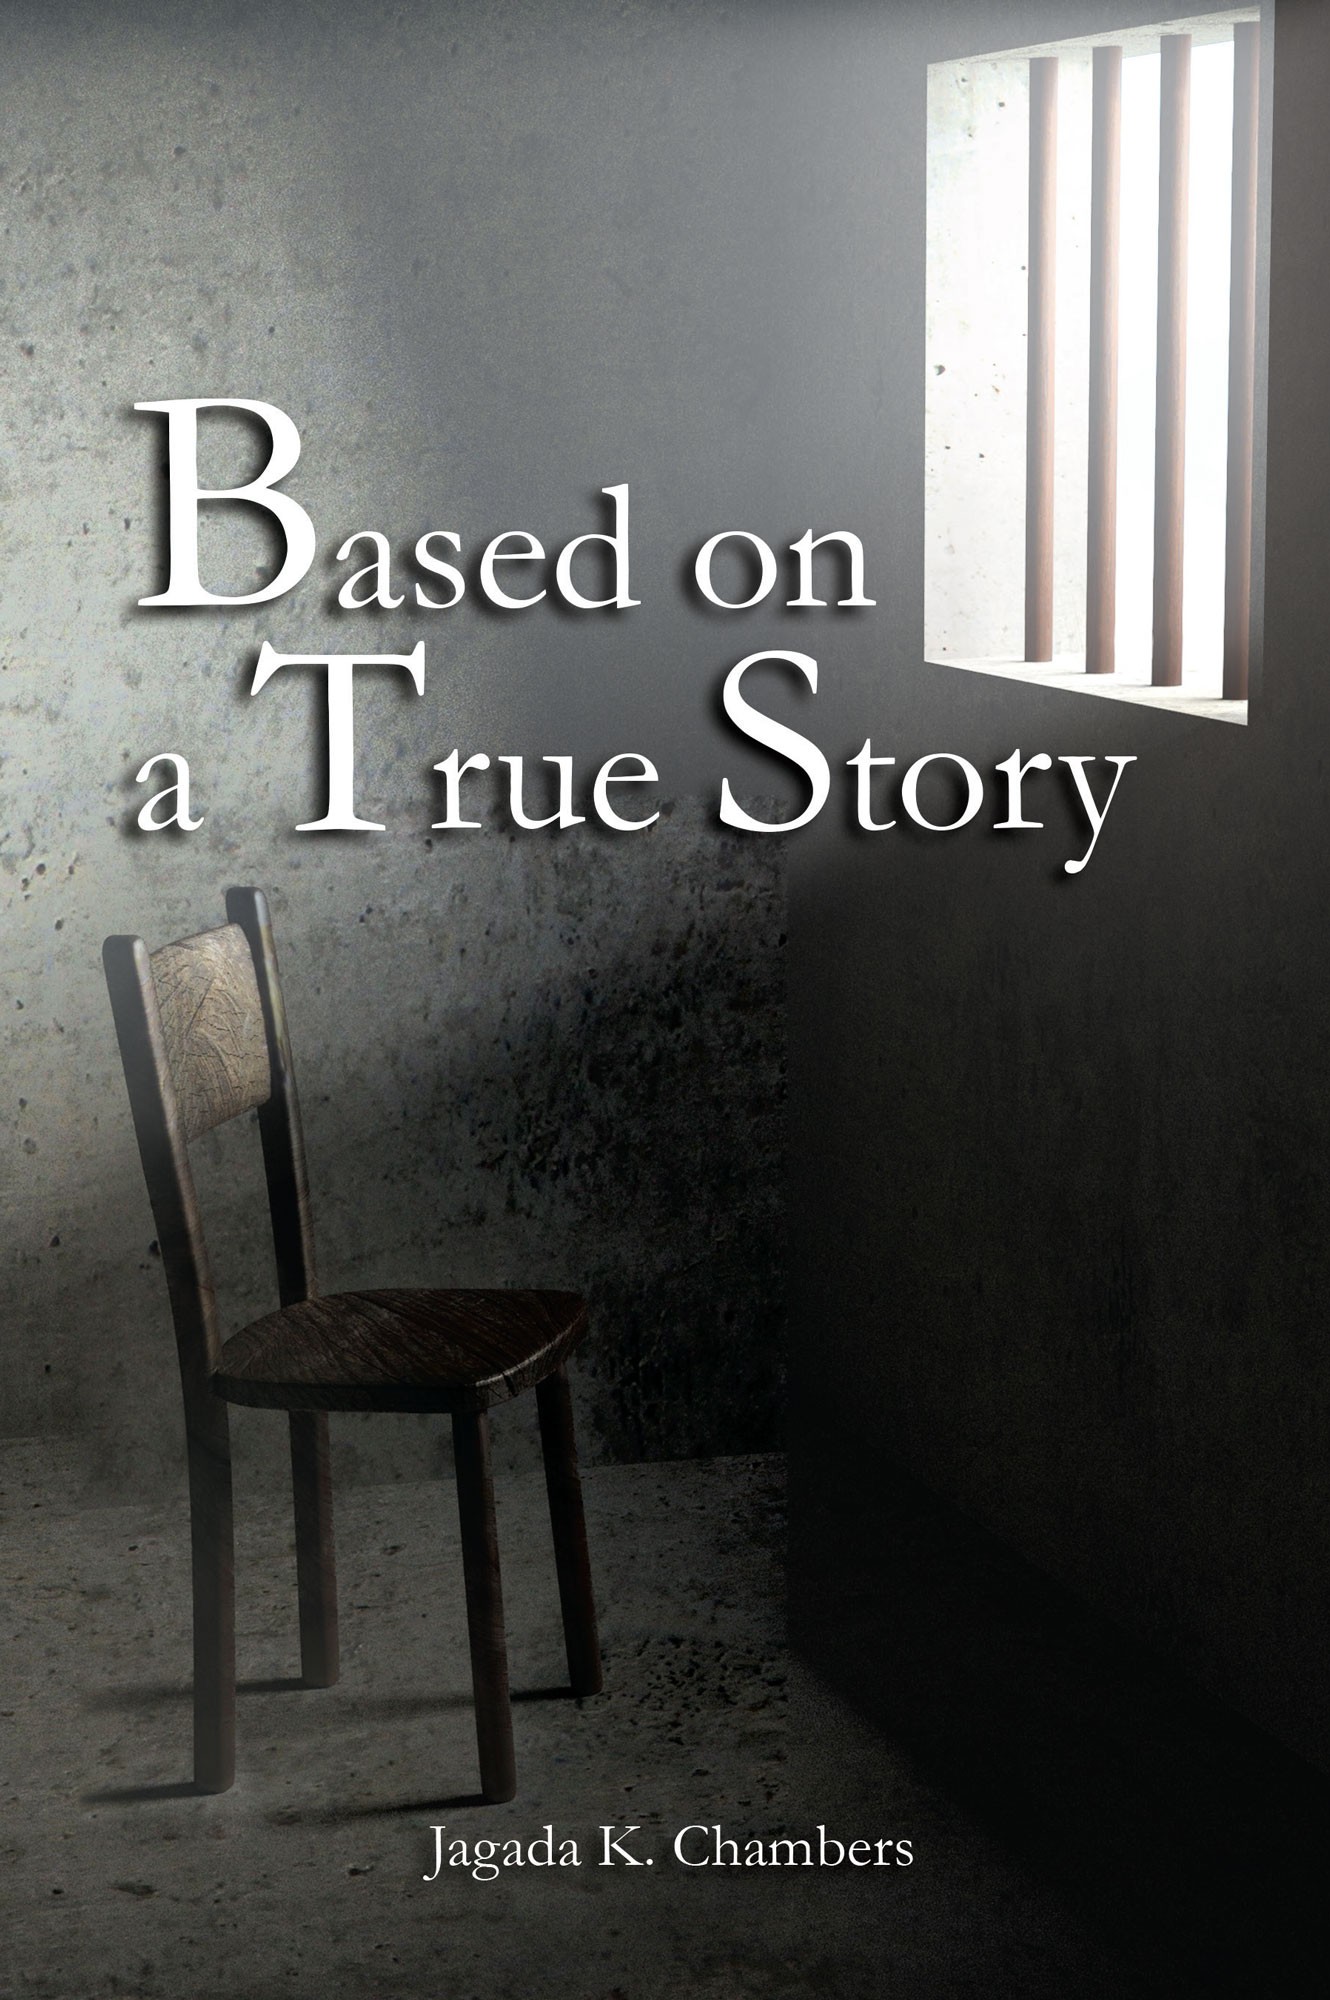 Jagada Chambers's First Book "Based On a True Story" is a ...